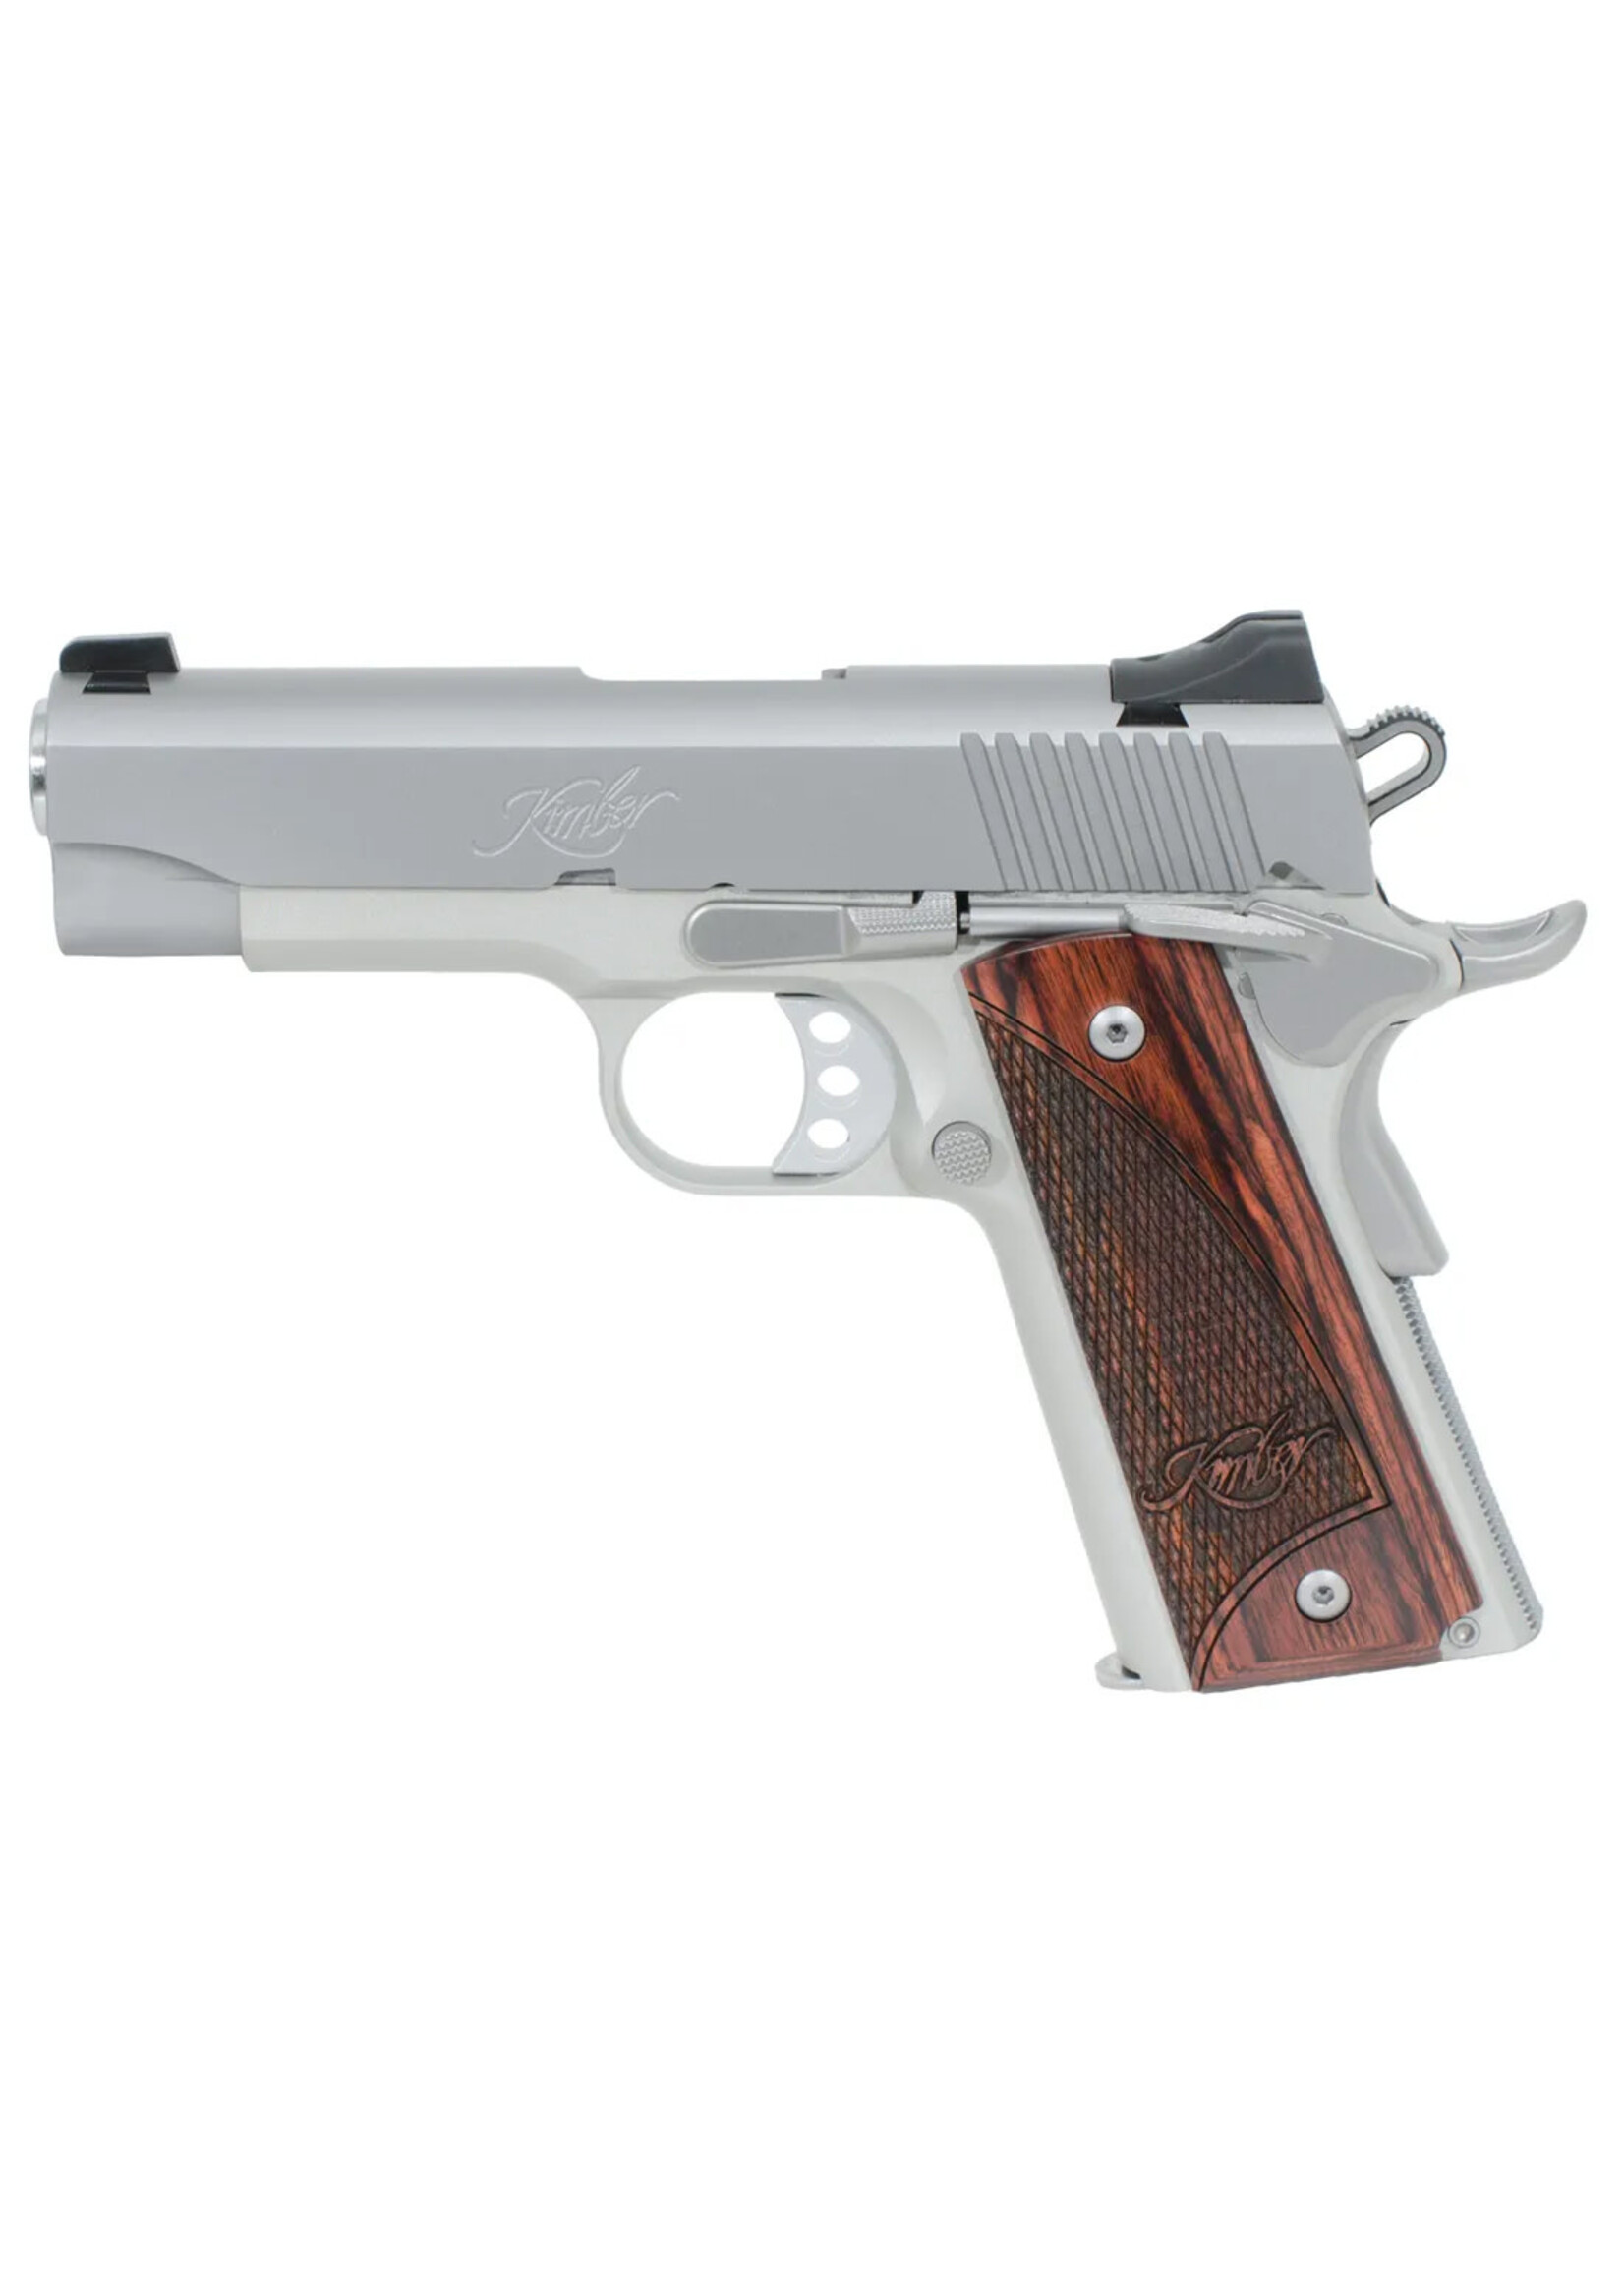 Kimber Kimber, STAINLESS PRO CARRY II, Semi-automatic, Full Size, 9MM, 4" Barrel, Matte Finish, Silver, Wood Grips, Fiber Optic Front Sight, 9 Rounds 3200323